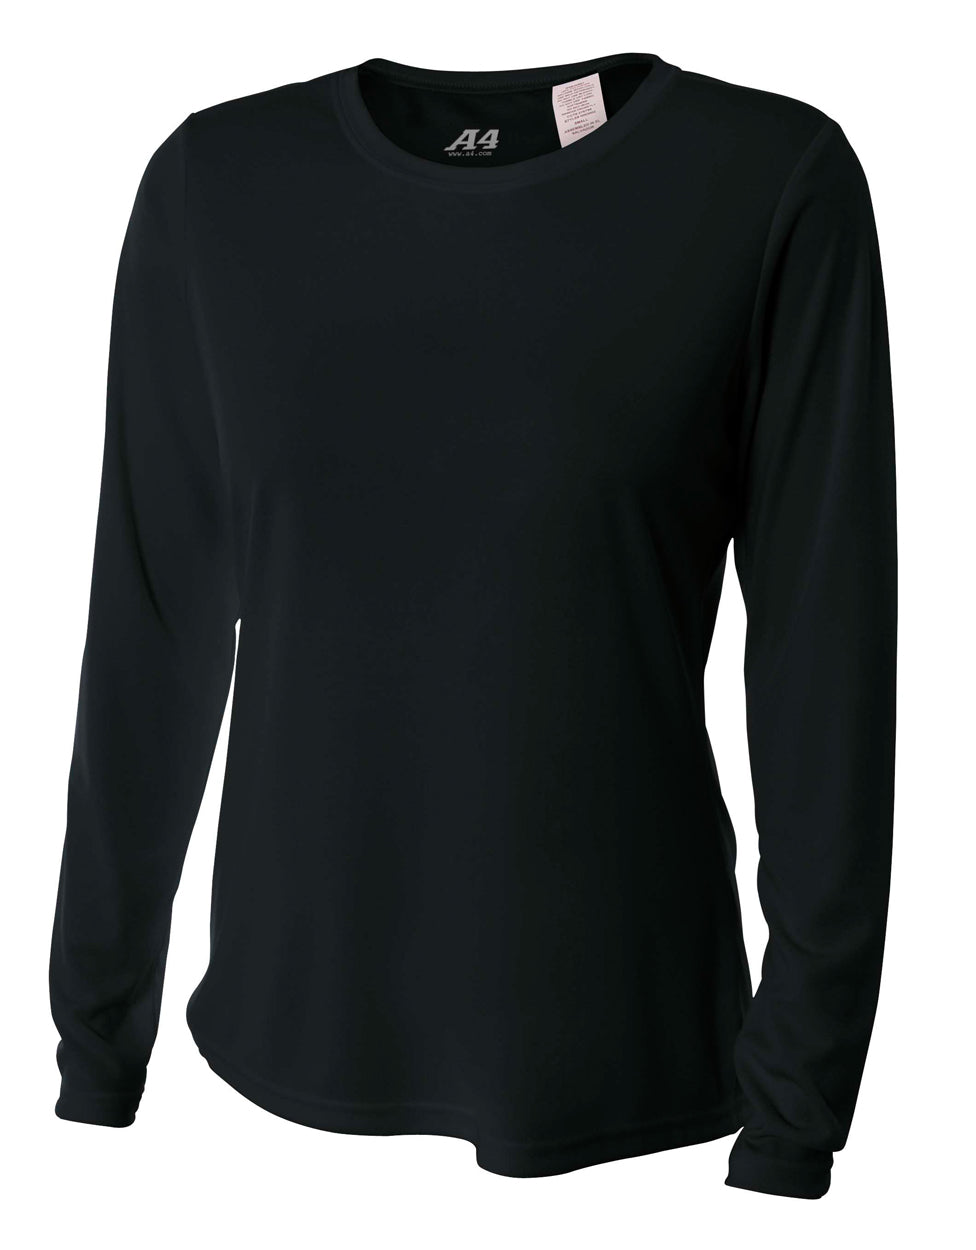 Black A4 Long Sleeve Cooling Performance Crew